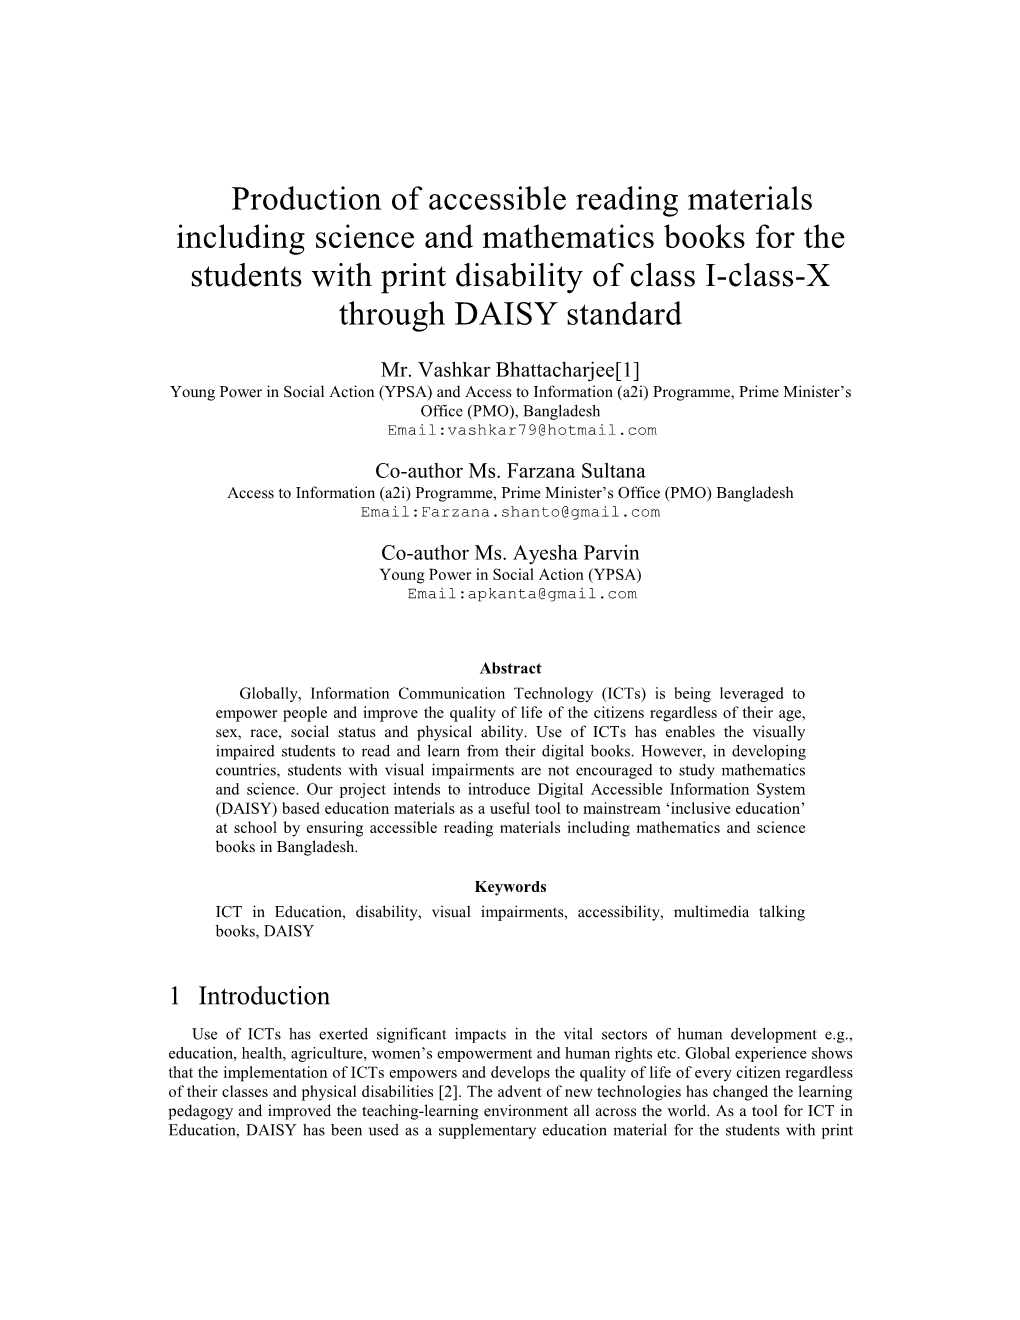 Production of Accessible Reading Materials Including Science and Mathematics Books for the Students with Print Disability of Class I-Class-X Through DAISY Standard